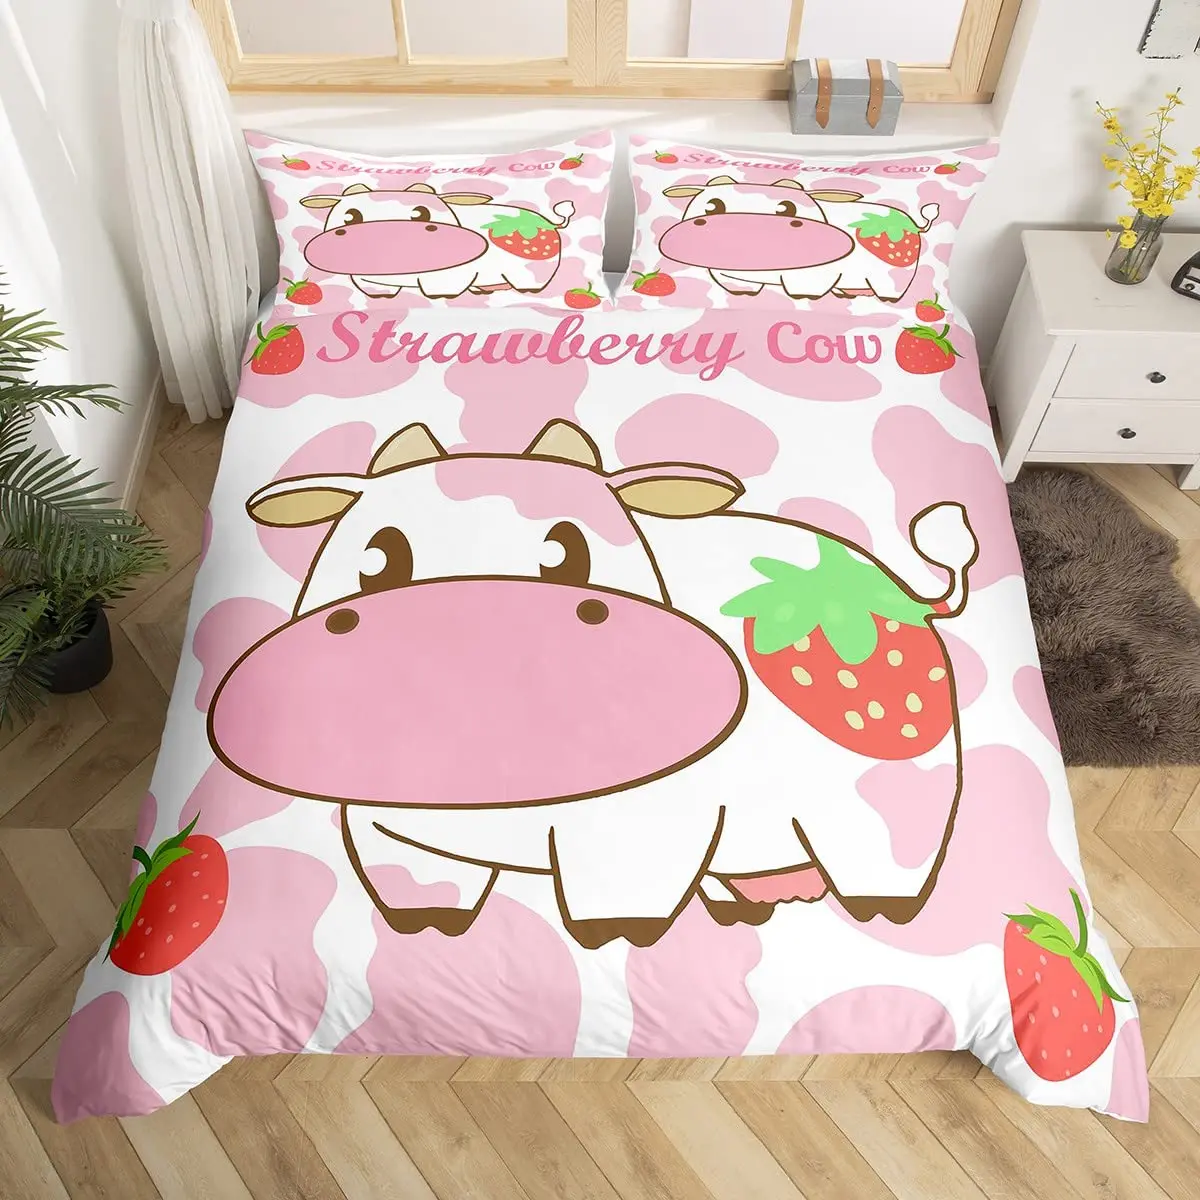 Milk Cow Duvet Cover Set Pink White Cow Strawberry Pattern Comforter Cover Bedding Set for Girls Kawaii Milk Cow Qulit Cover Set images - 6